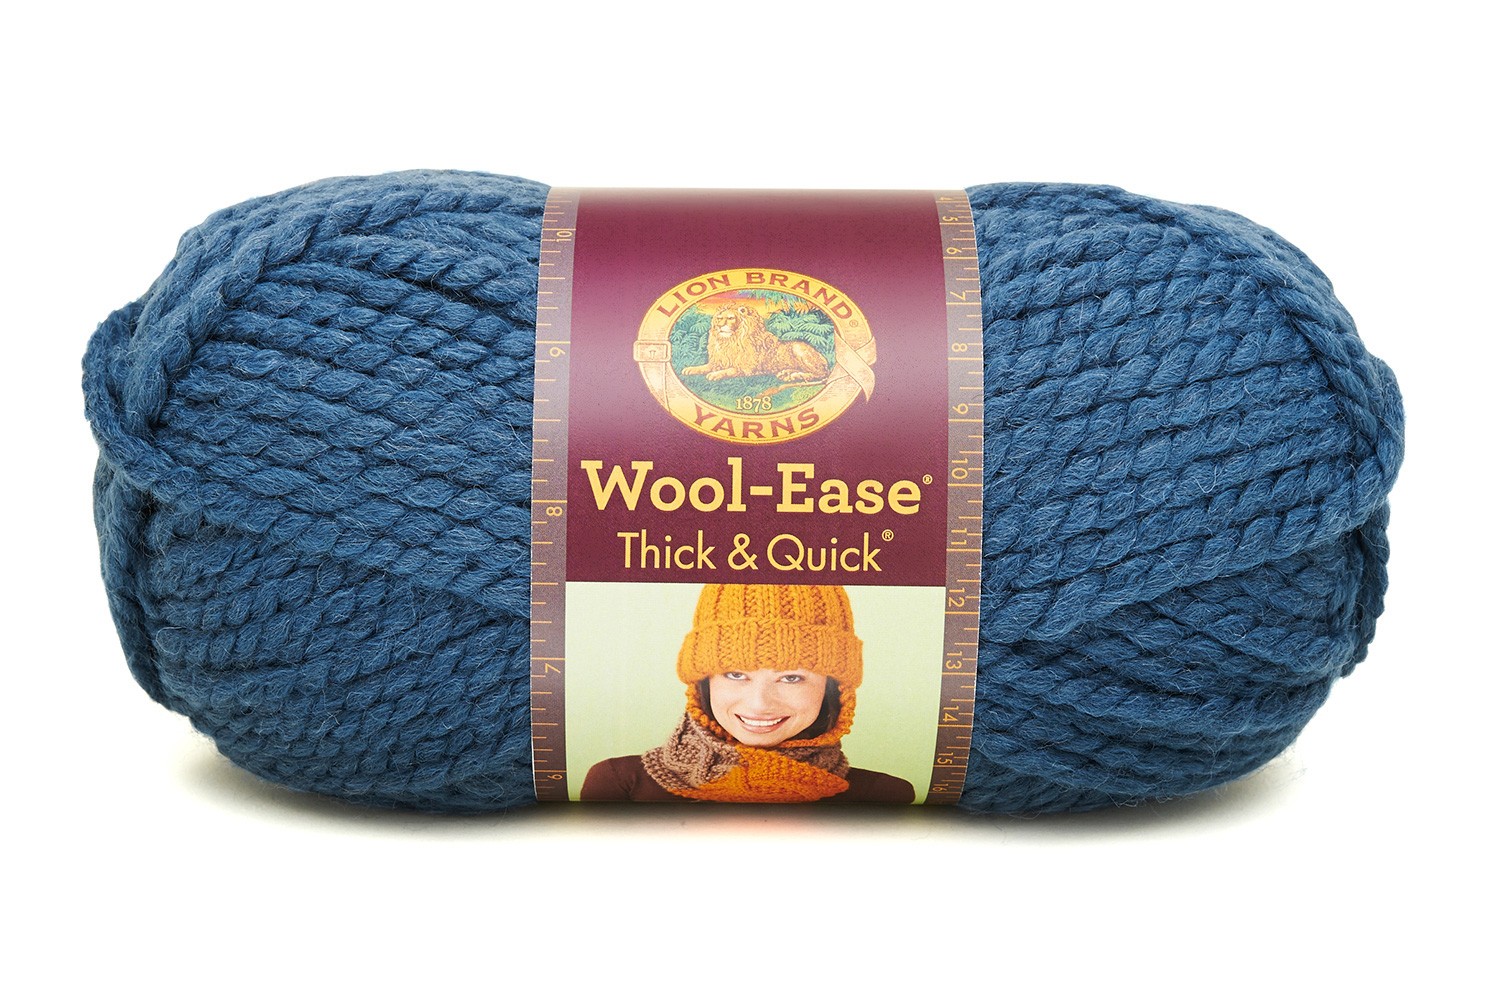 Wool-Ease® Thick & Quick®